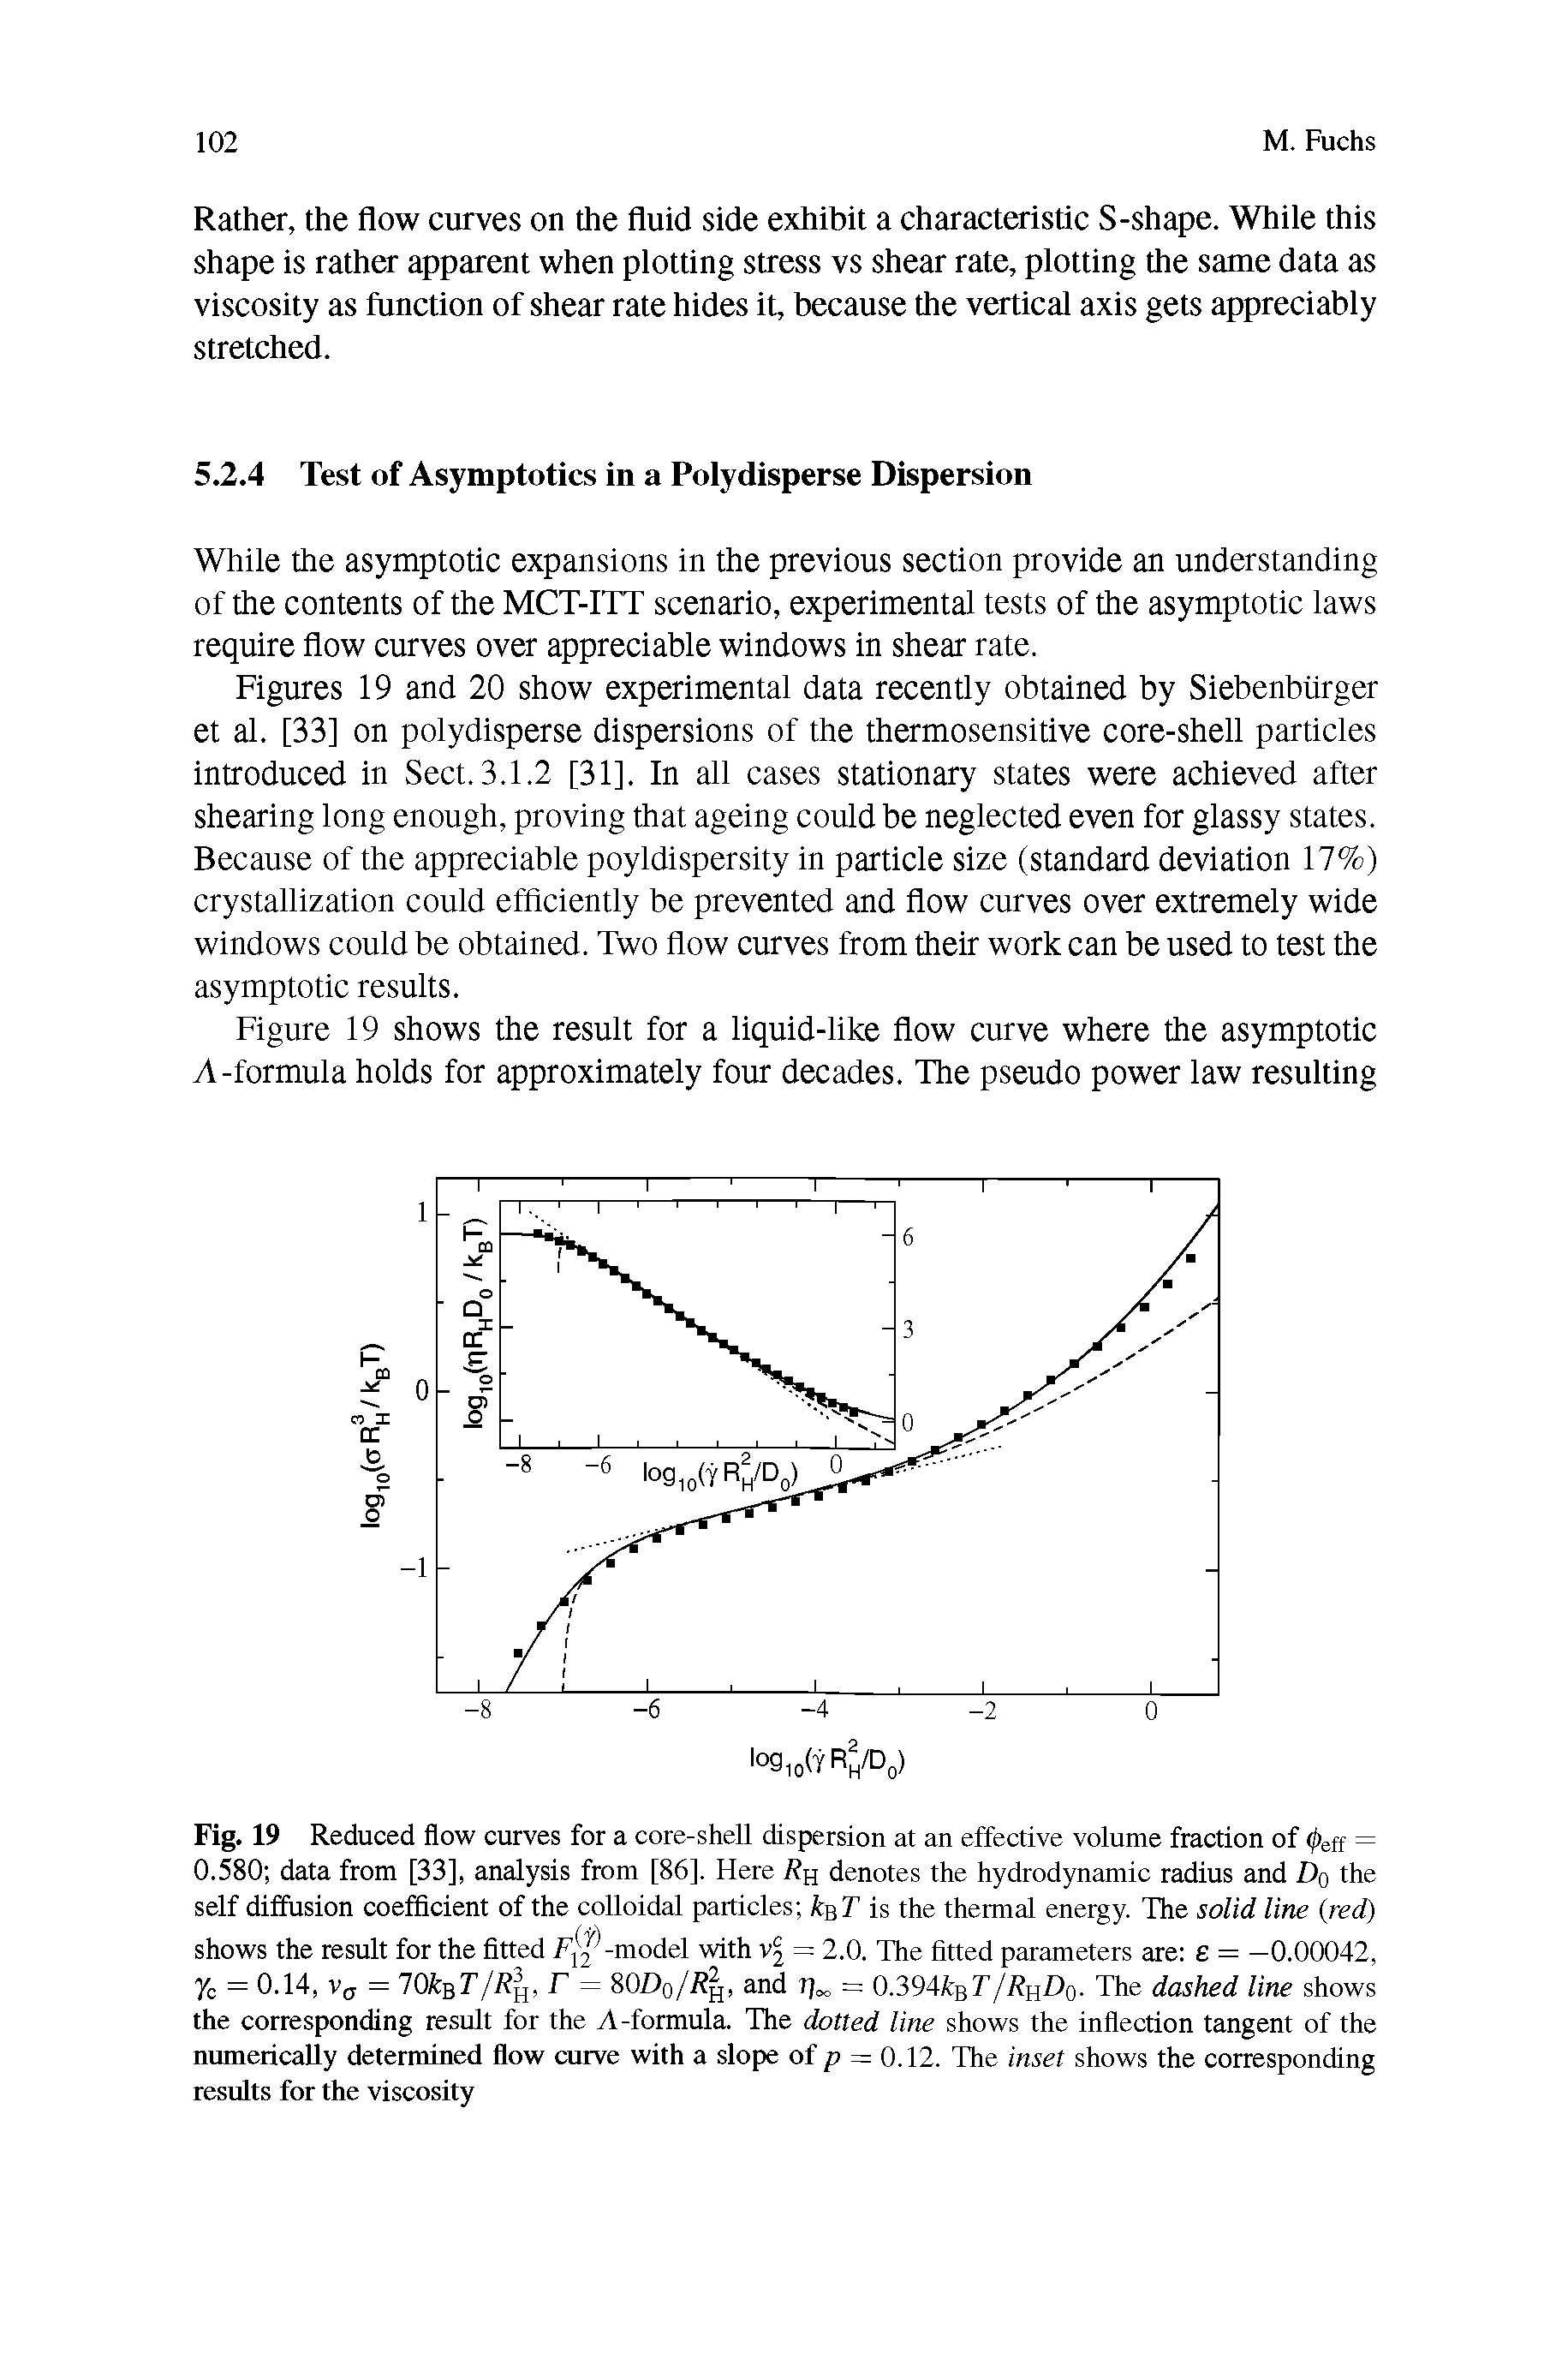 Fig. 19 Reduced flow curves for a core-shell dispersion at an effective volume fraction of ij>eff = 0.580 data from [33], analysis from [86]. Here Rg denotes the hydrodynamic radius and Dq the self diffusion coefficient of the colloidal particles IcgT is the themial energy. The solid line (red) shows the result for the fitted fi -model with = 2.0. The fitted parameters are e = -0.00042, 7c = 0.14, V(j = VOfcaT/Rg, F = 8()/J,-,/A j, and = (),394A [i7 The dashed line shows the corresponding result for the A-formula. The dotted line shows the inflection tangent of the numerically determined flow curve with a slope of p = 0.12. The inset shows the corresponding results for the viscosity...